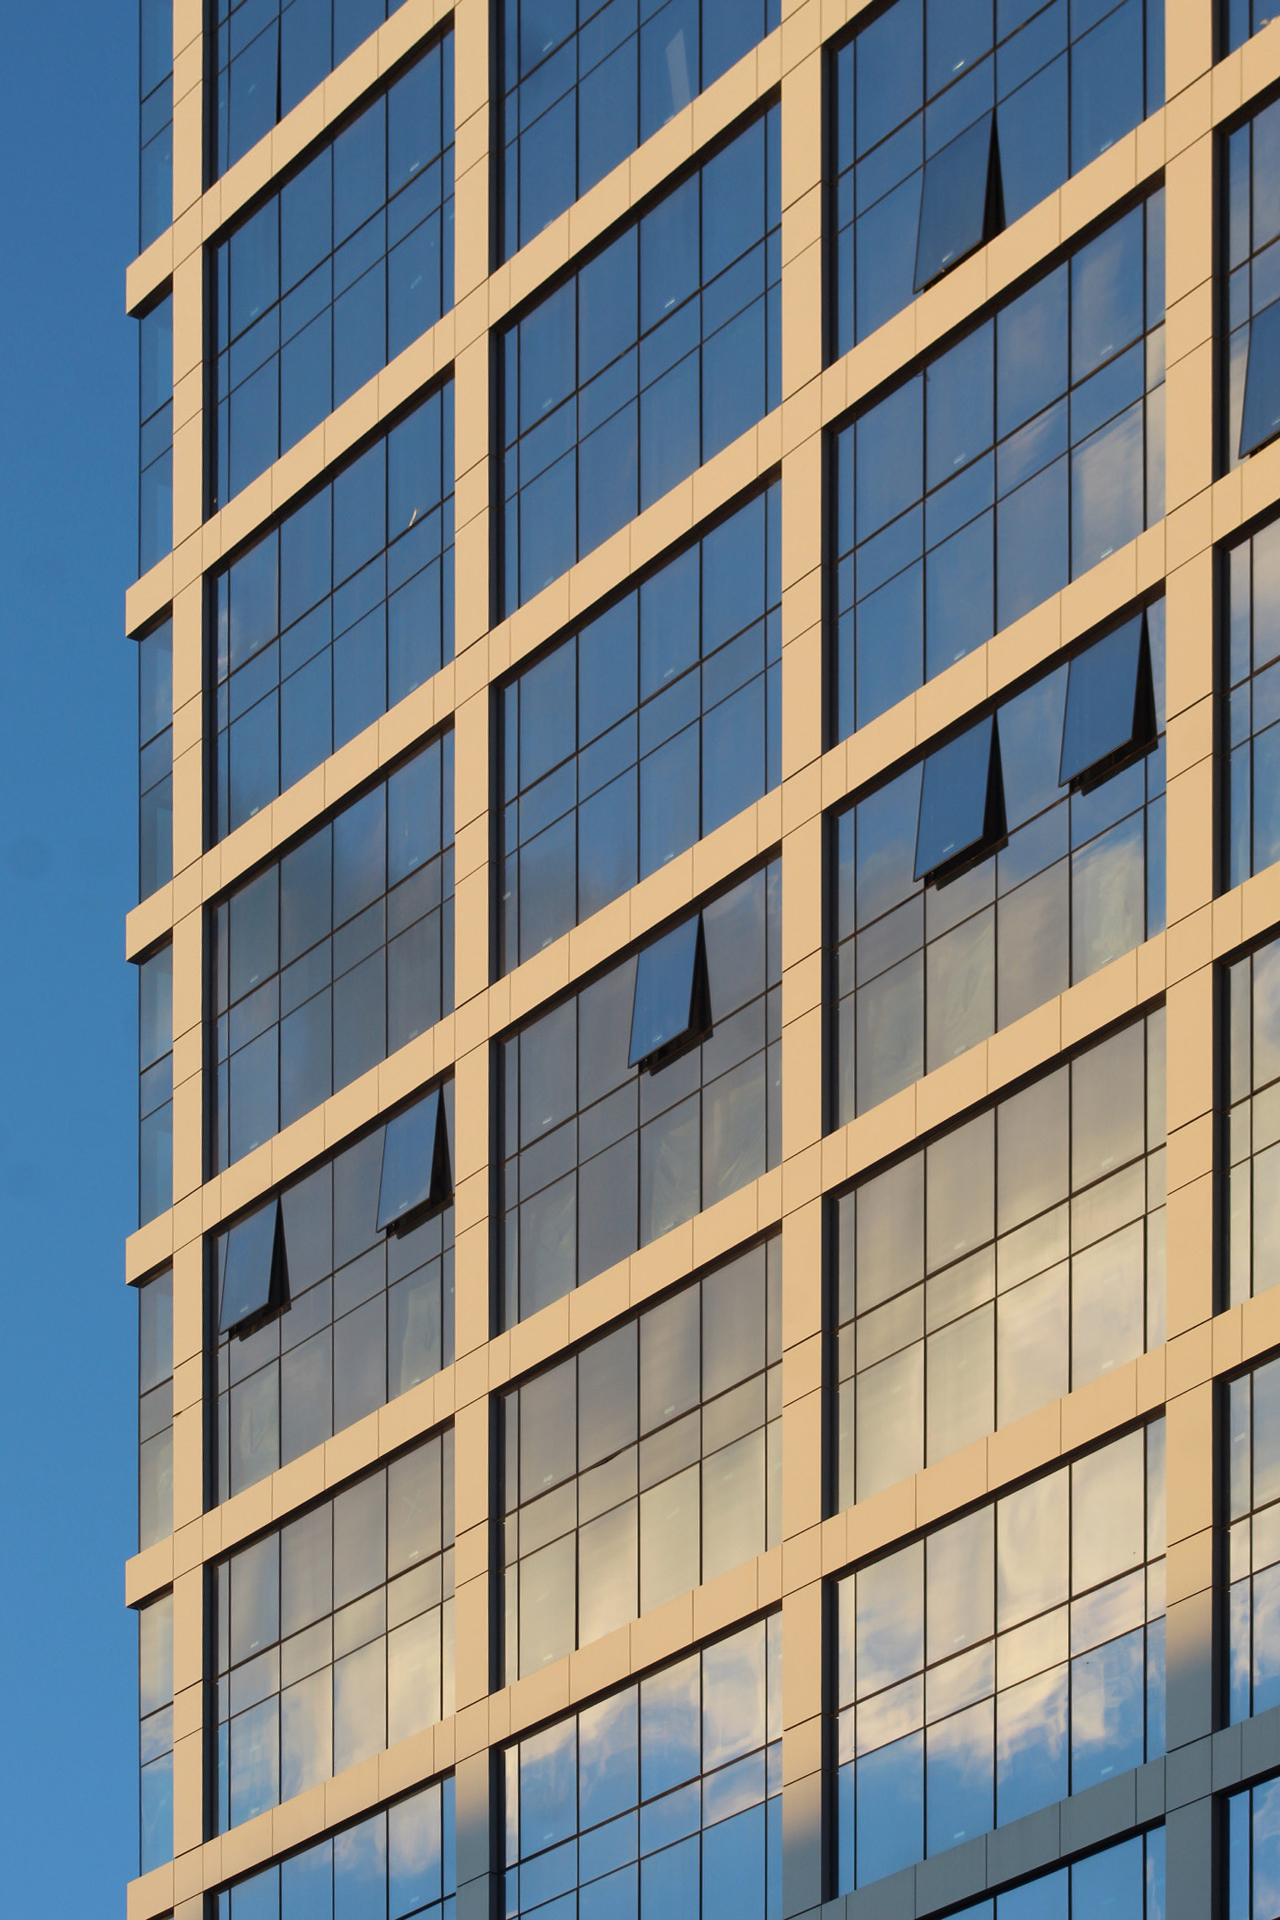 Closeup of the glass fiber reinforced panels on the exterior of the façade at 601 W 29th St.